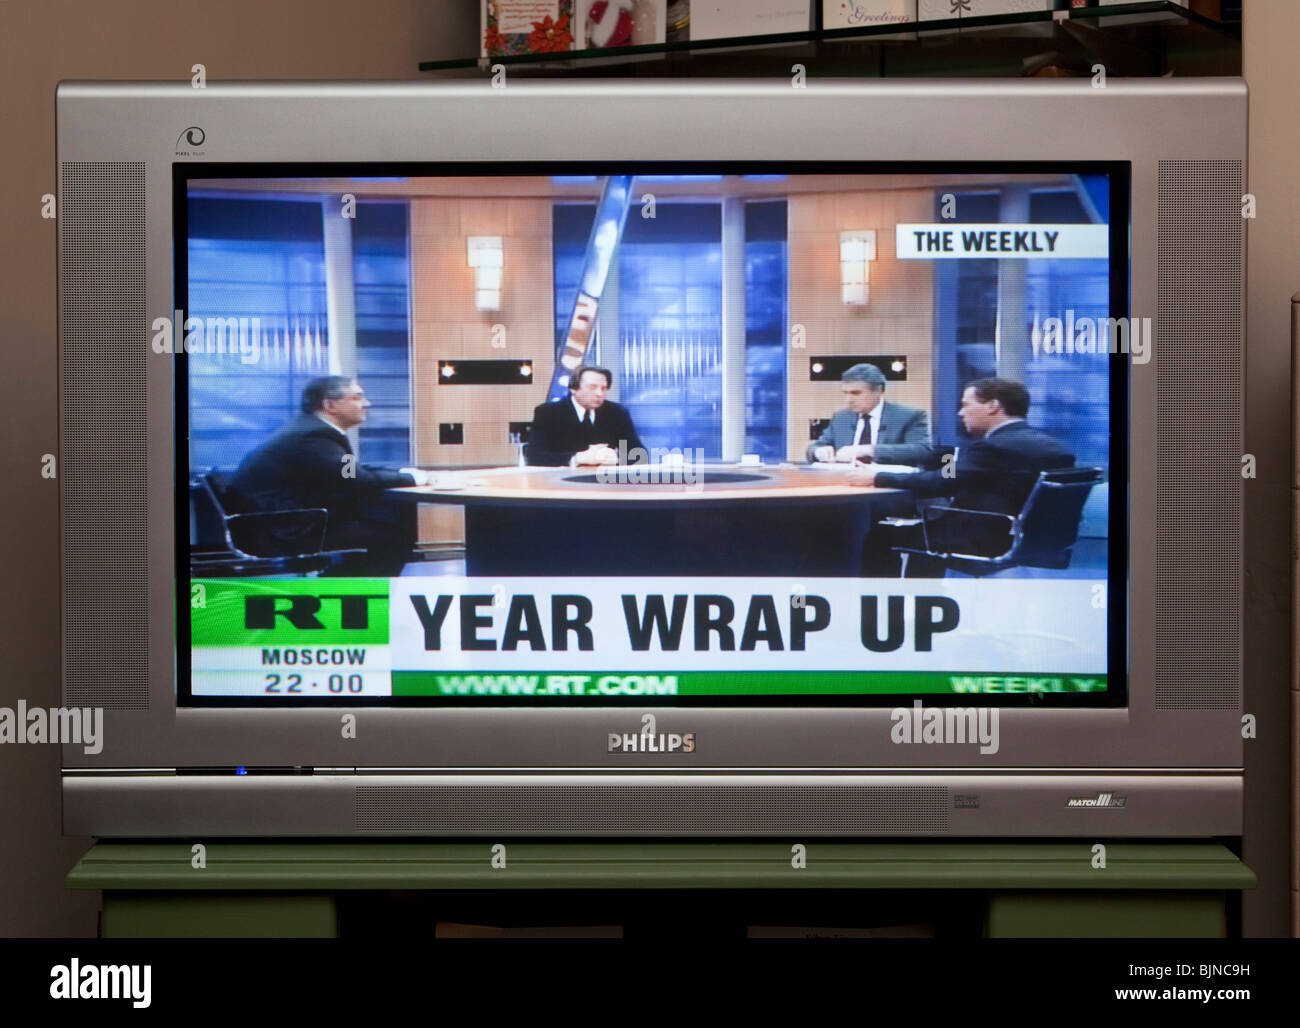 TV screen showing Russia Today RT News channel Stock Photo